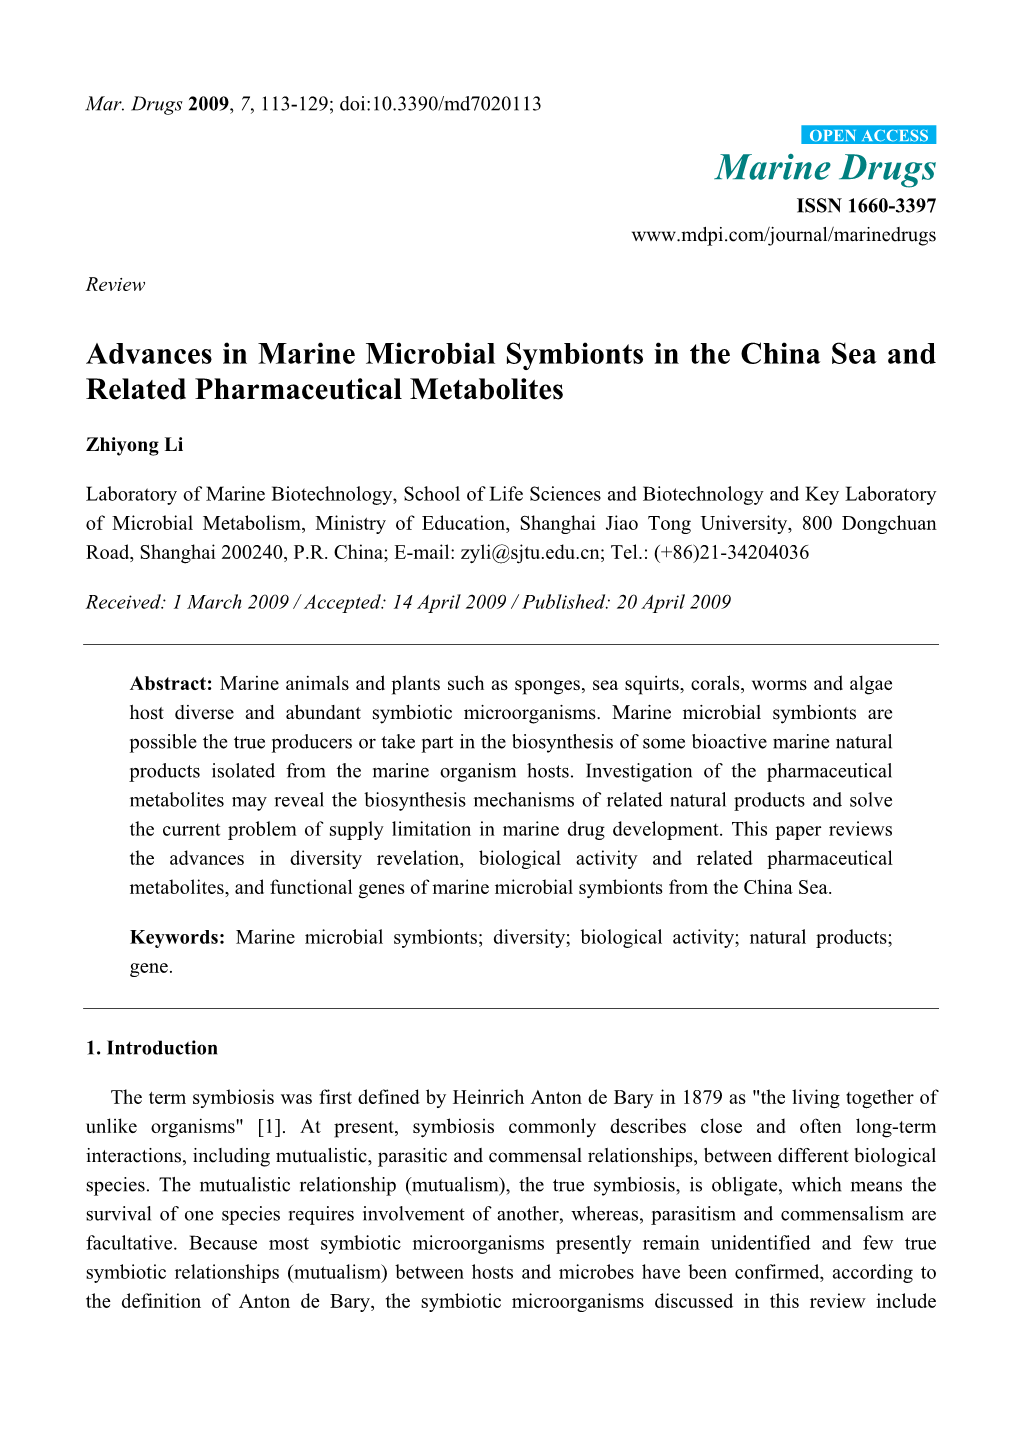 Advances in Marine Microbial Symbionts in the China Sea and Related Pharmaceutical Metabolites